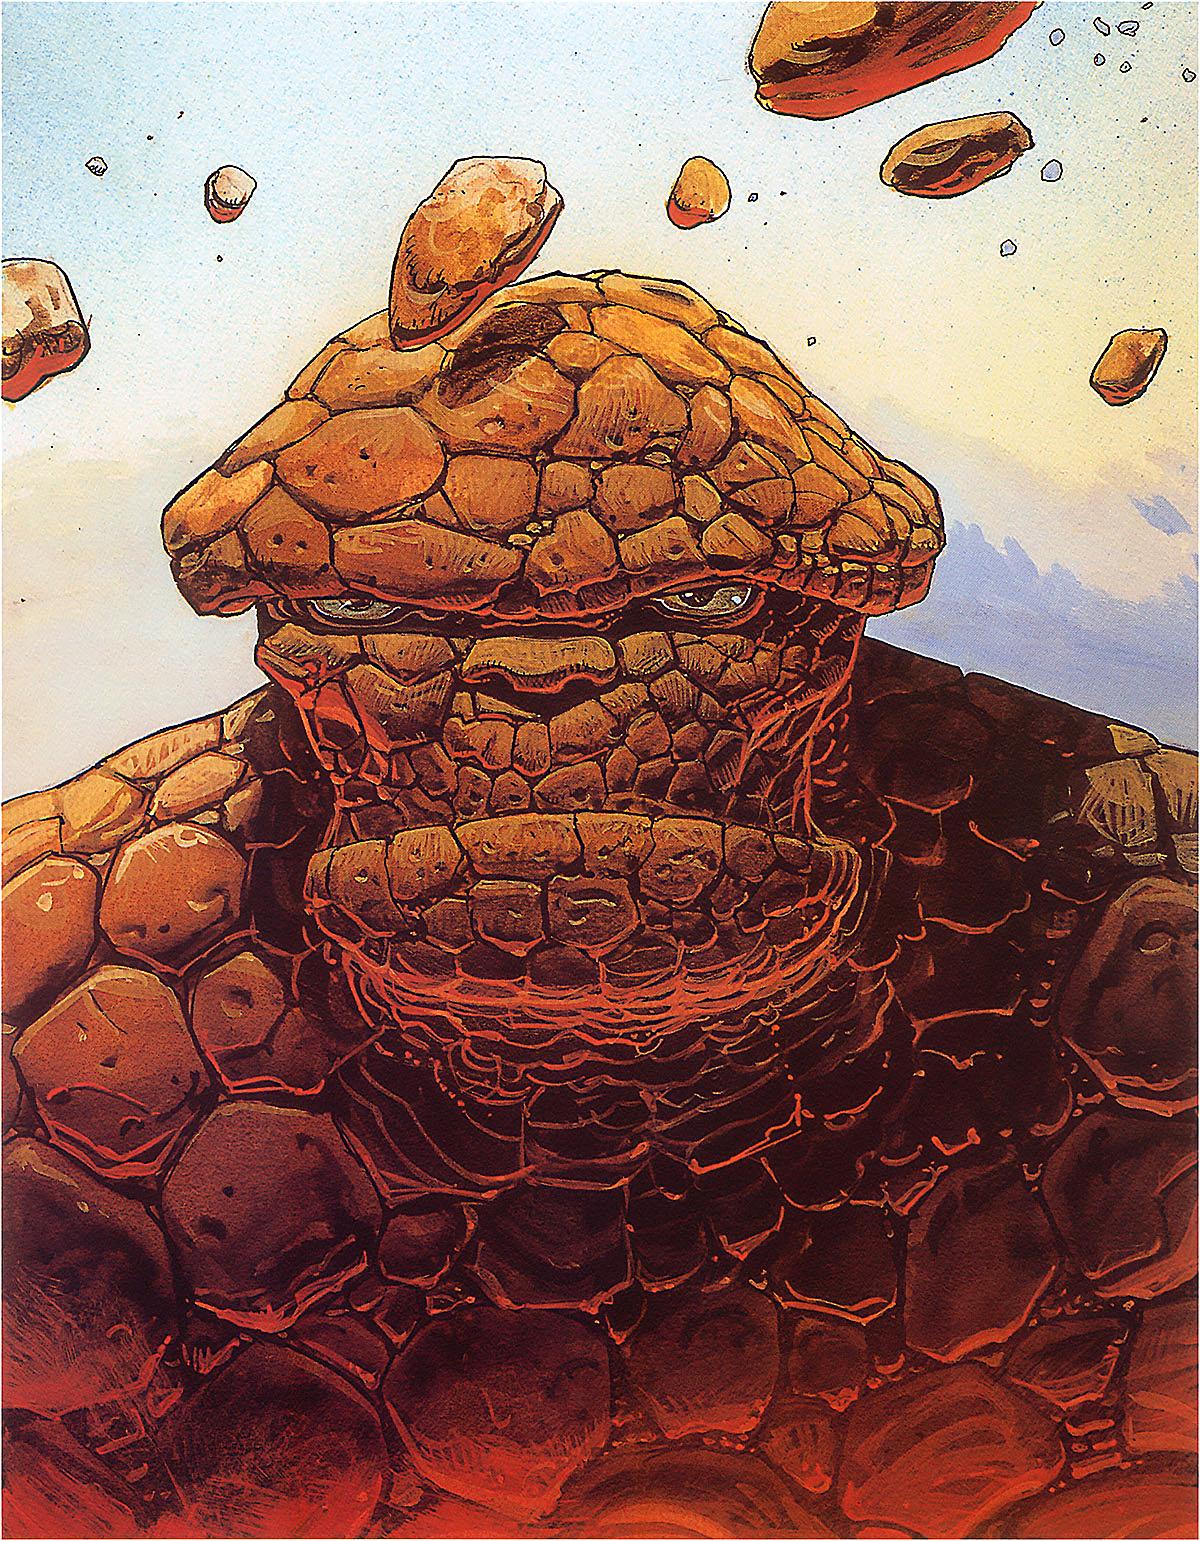 The Thing by Moebius